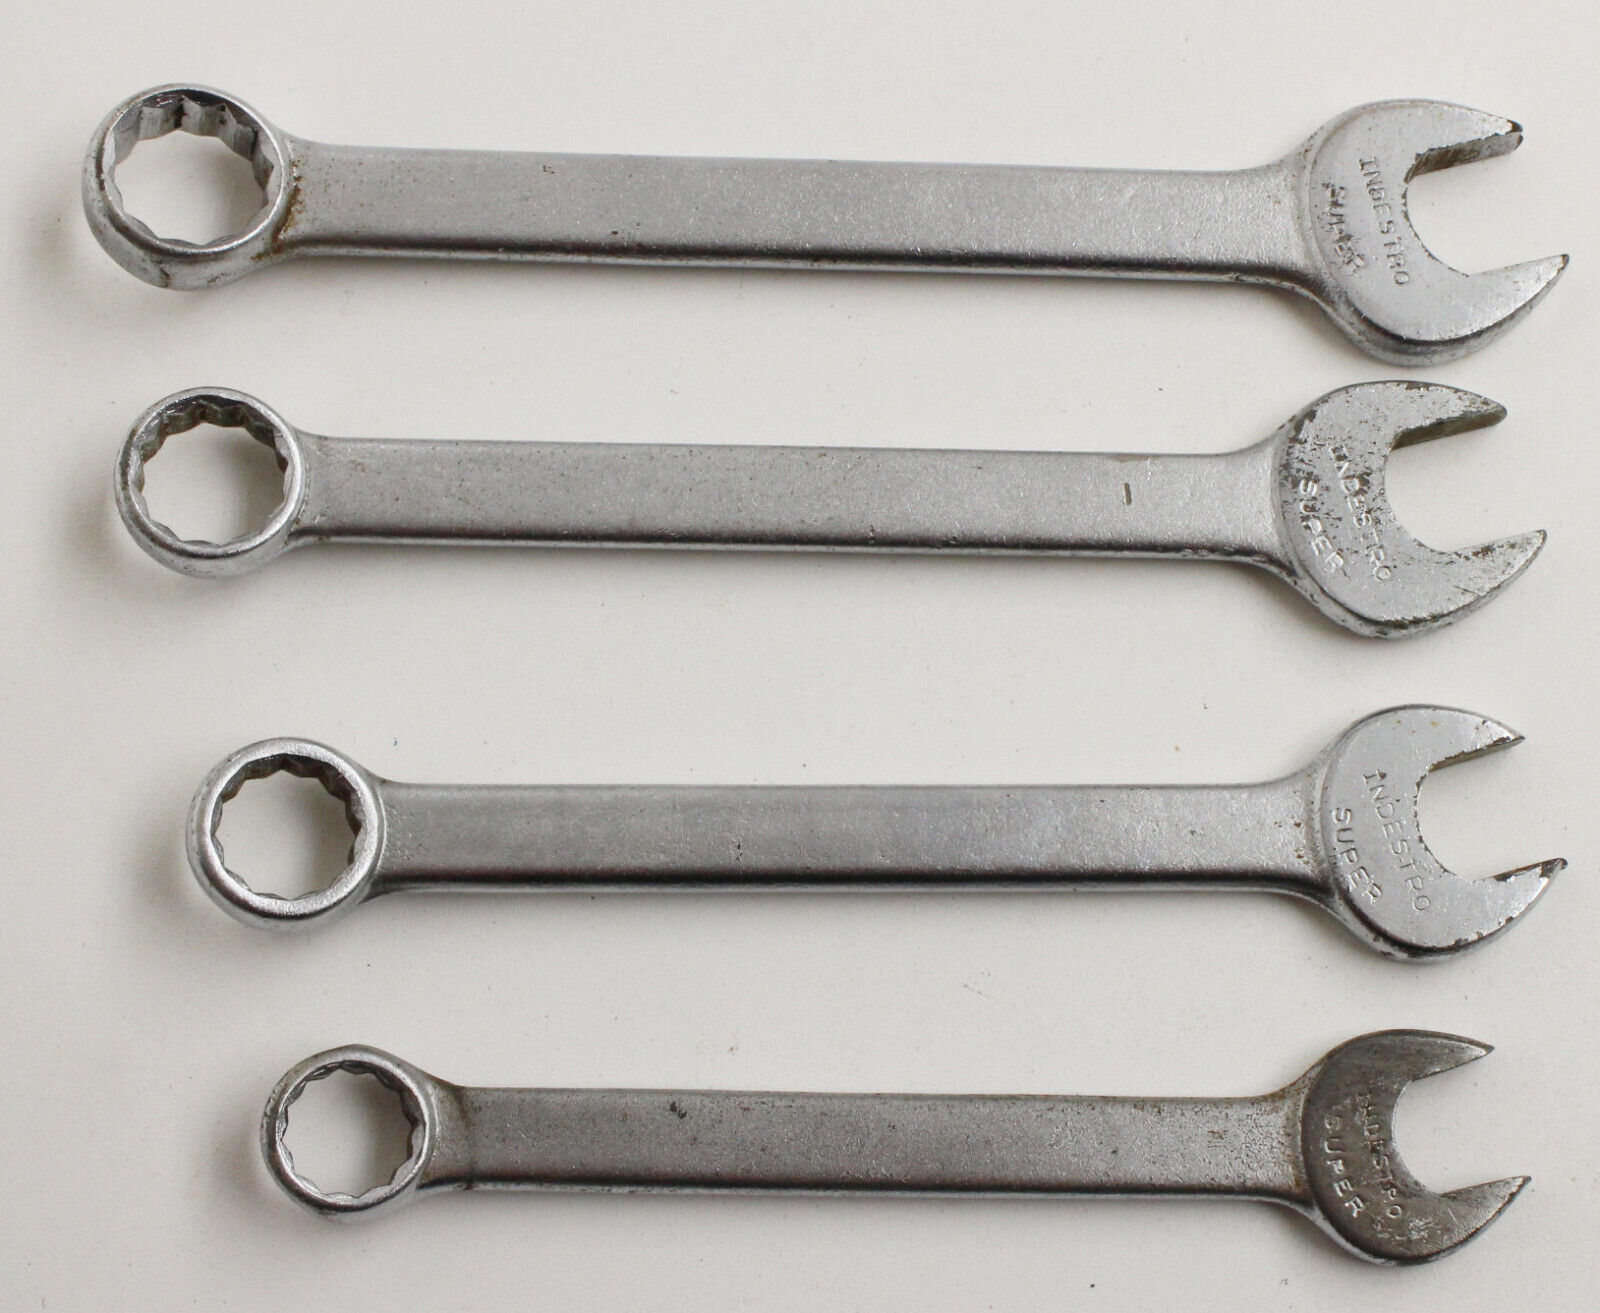 VTG INDESTRO Super Combination Wrench Set USA SAE 777S 776S 775S 774S 11/16-9/16